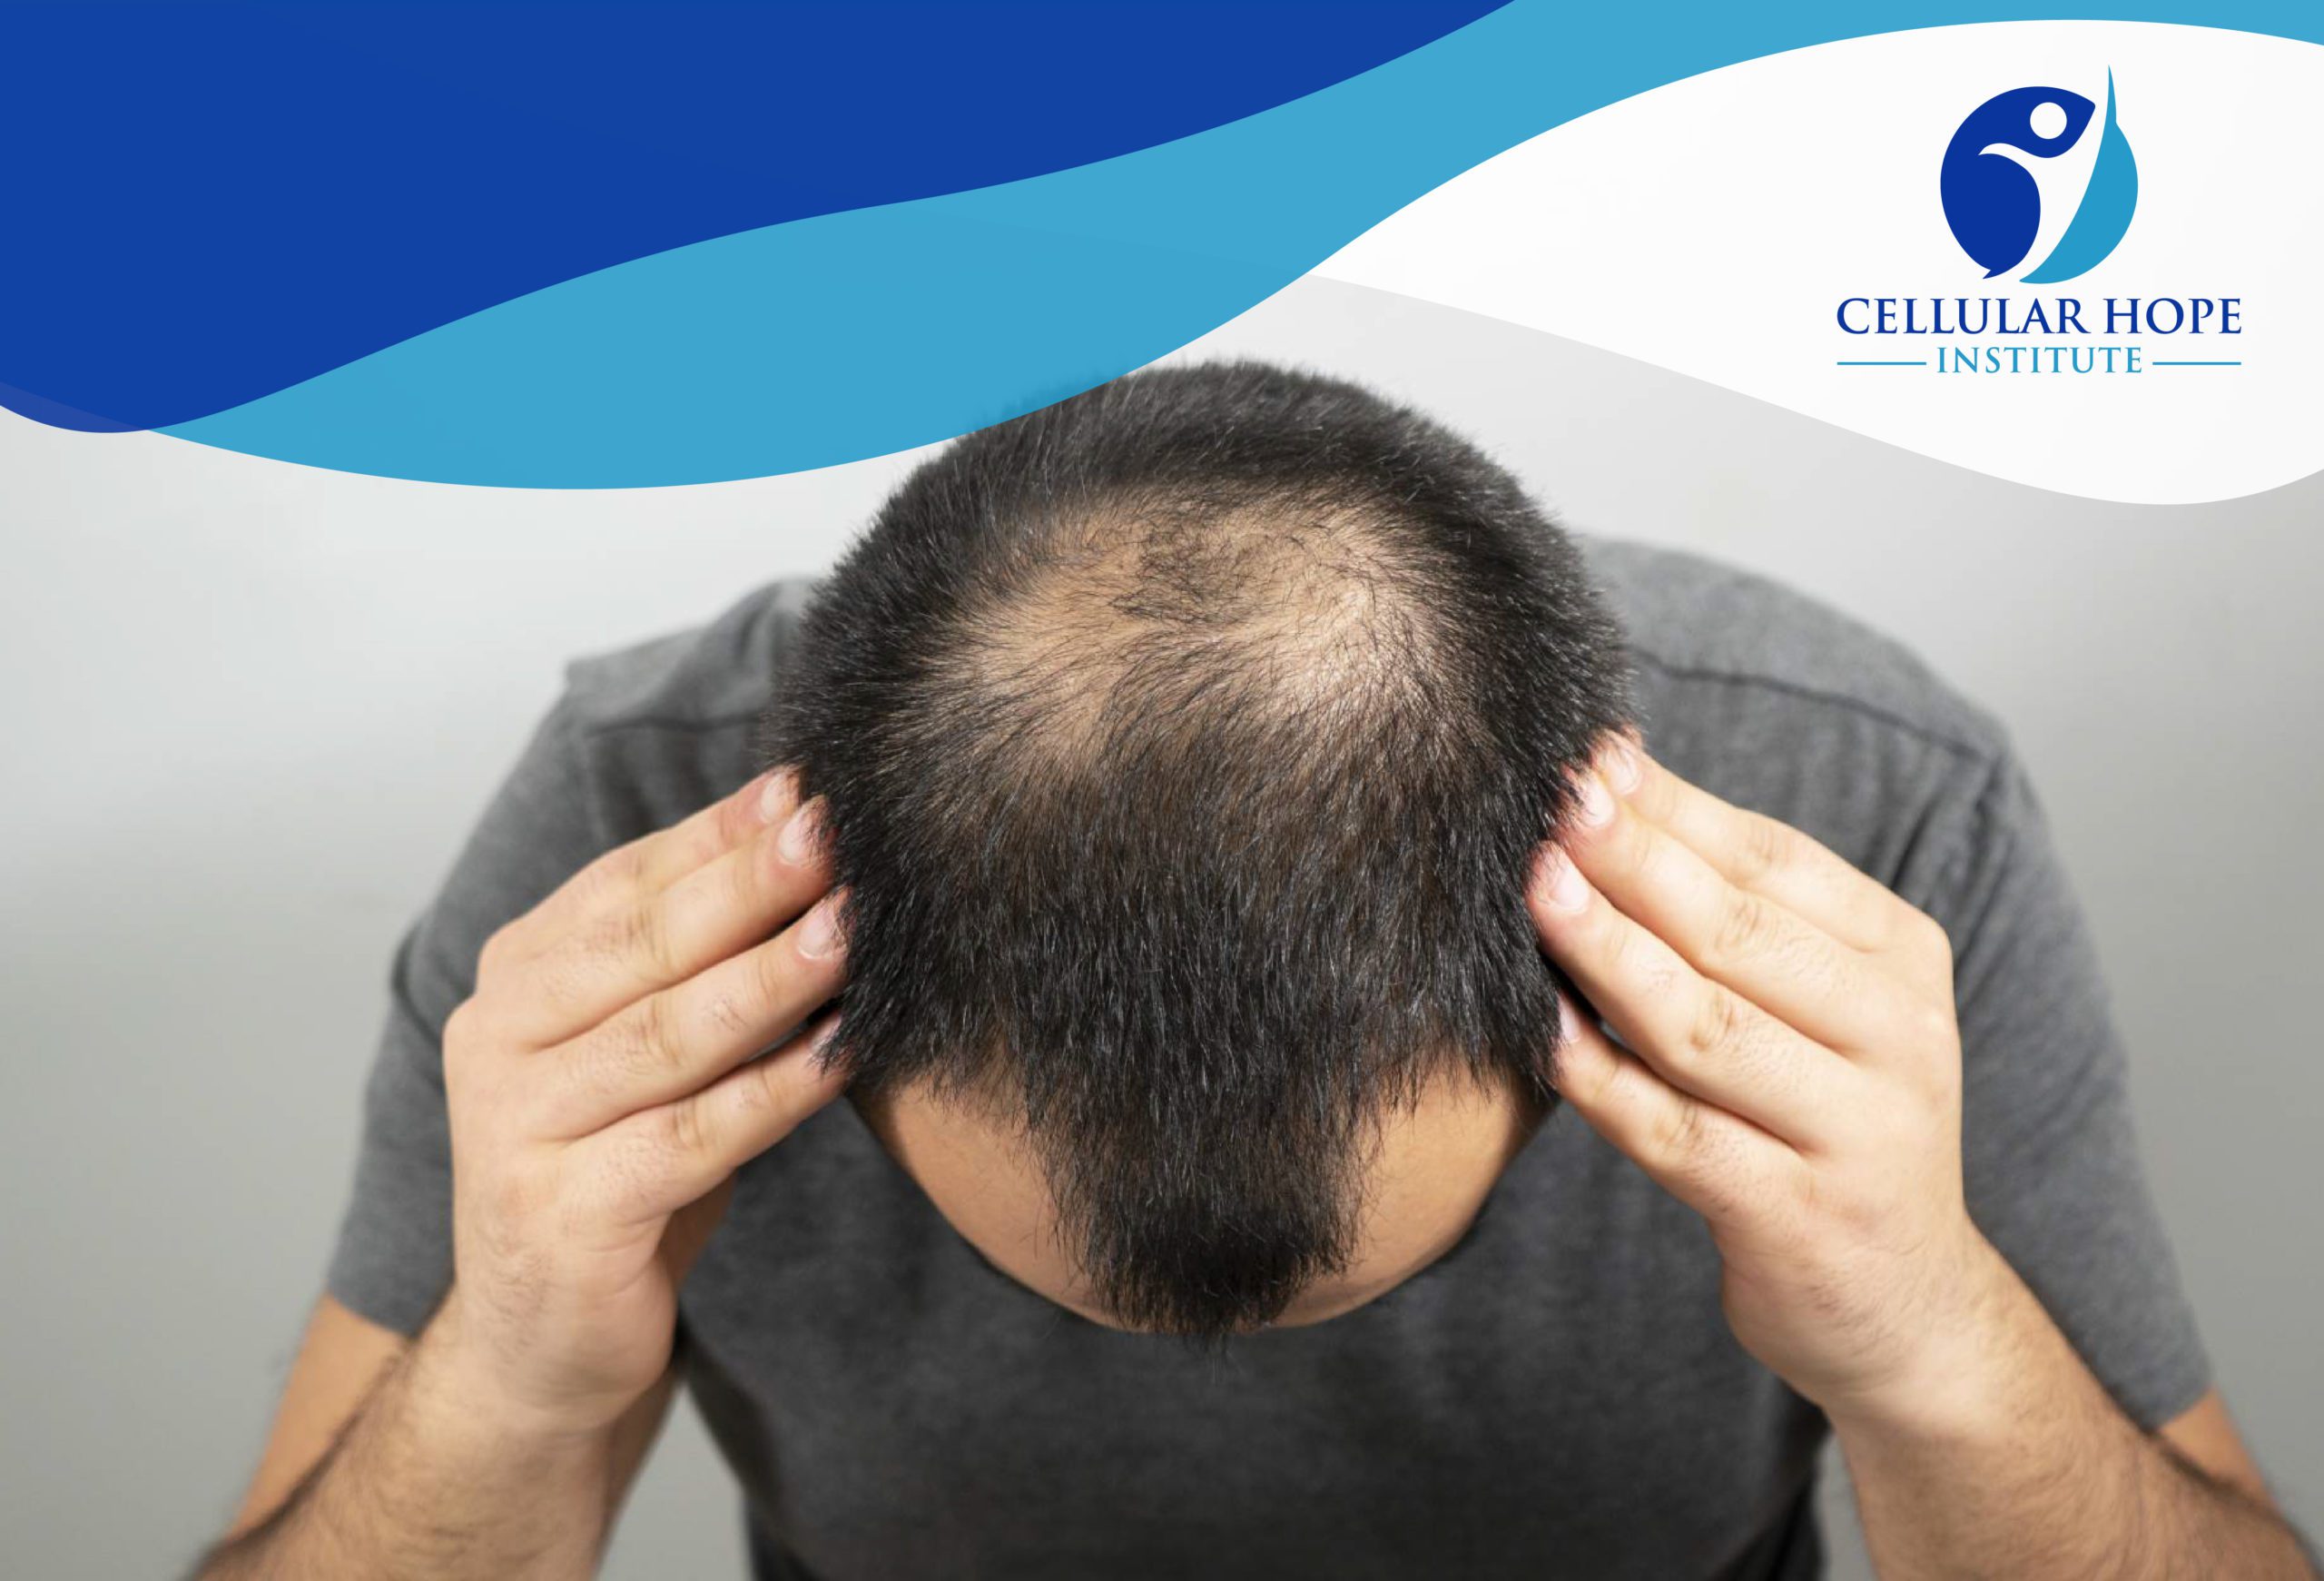 Can Stem Cell Therapy Help With Alopecia (hair loss)?